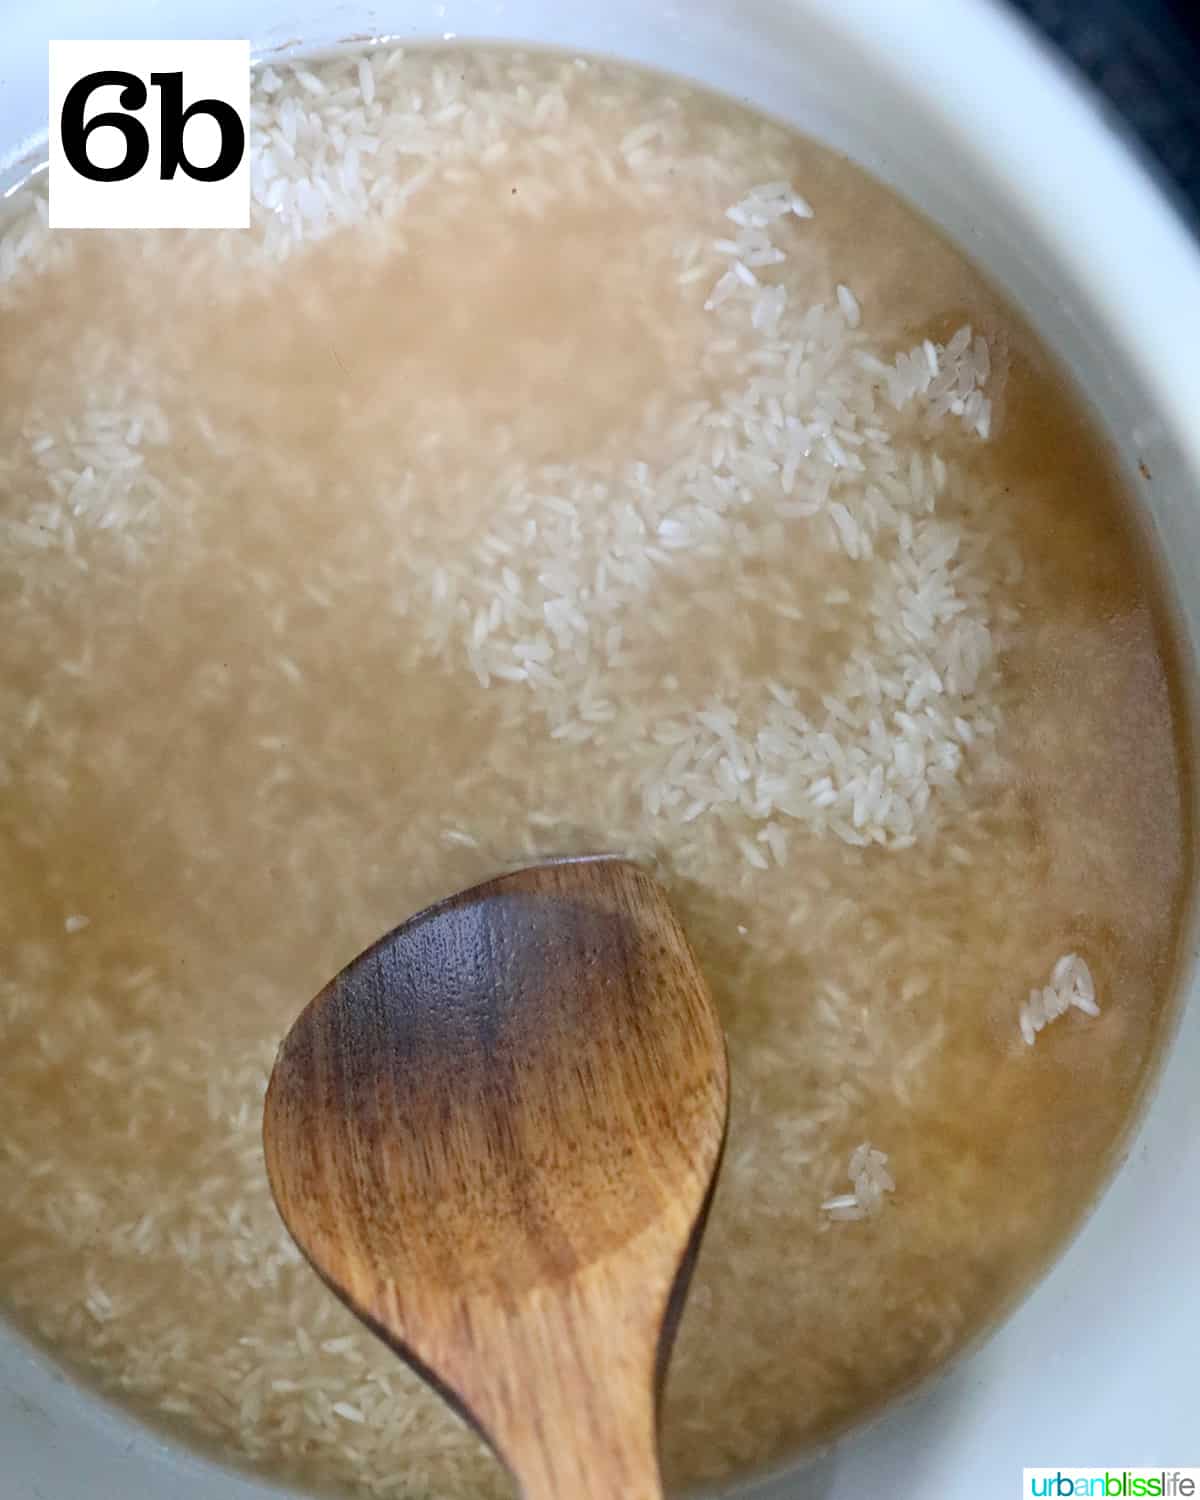 wooden spoon gently pushing down rice into broth in an instant pot.